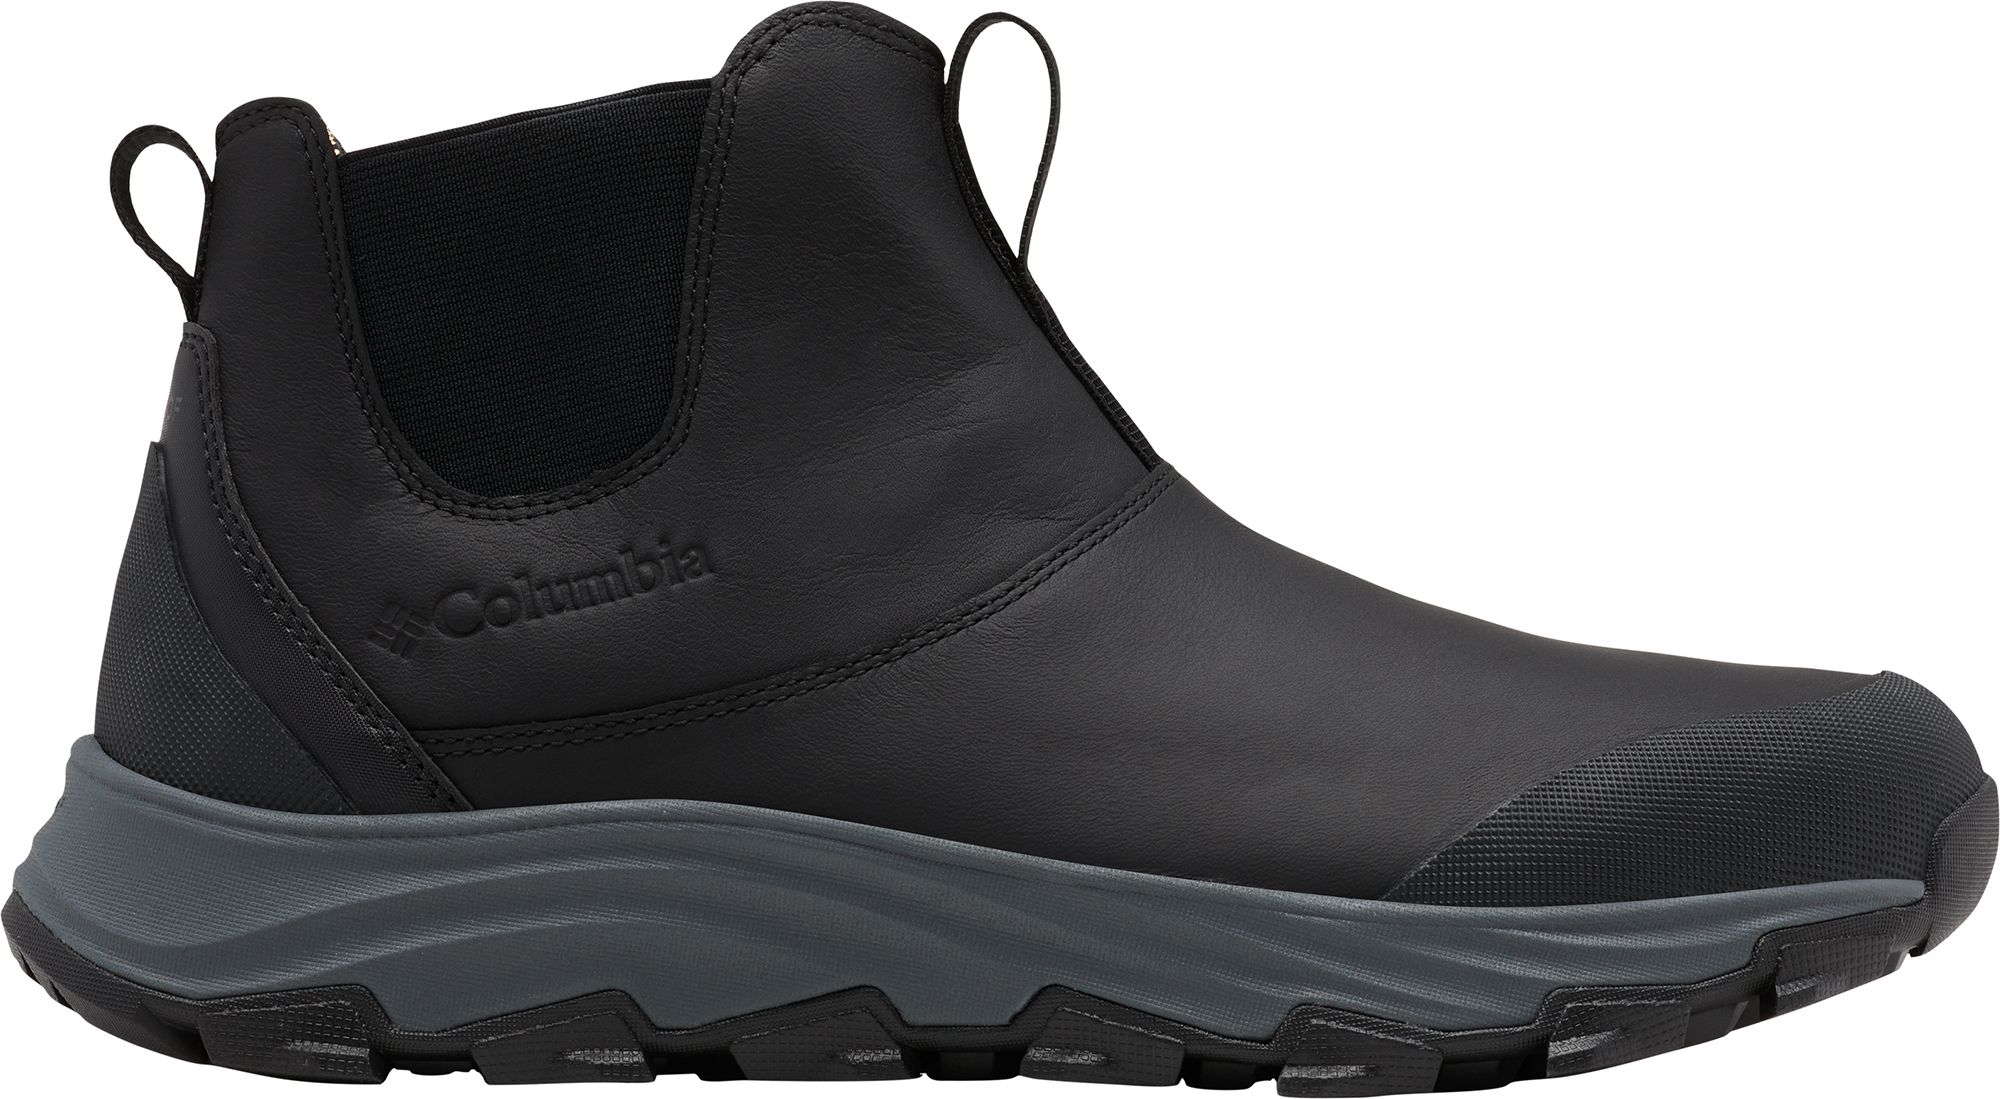 Columbia Men's Expeditionist Insulated Waterproof Chelsea Boots